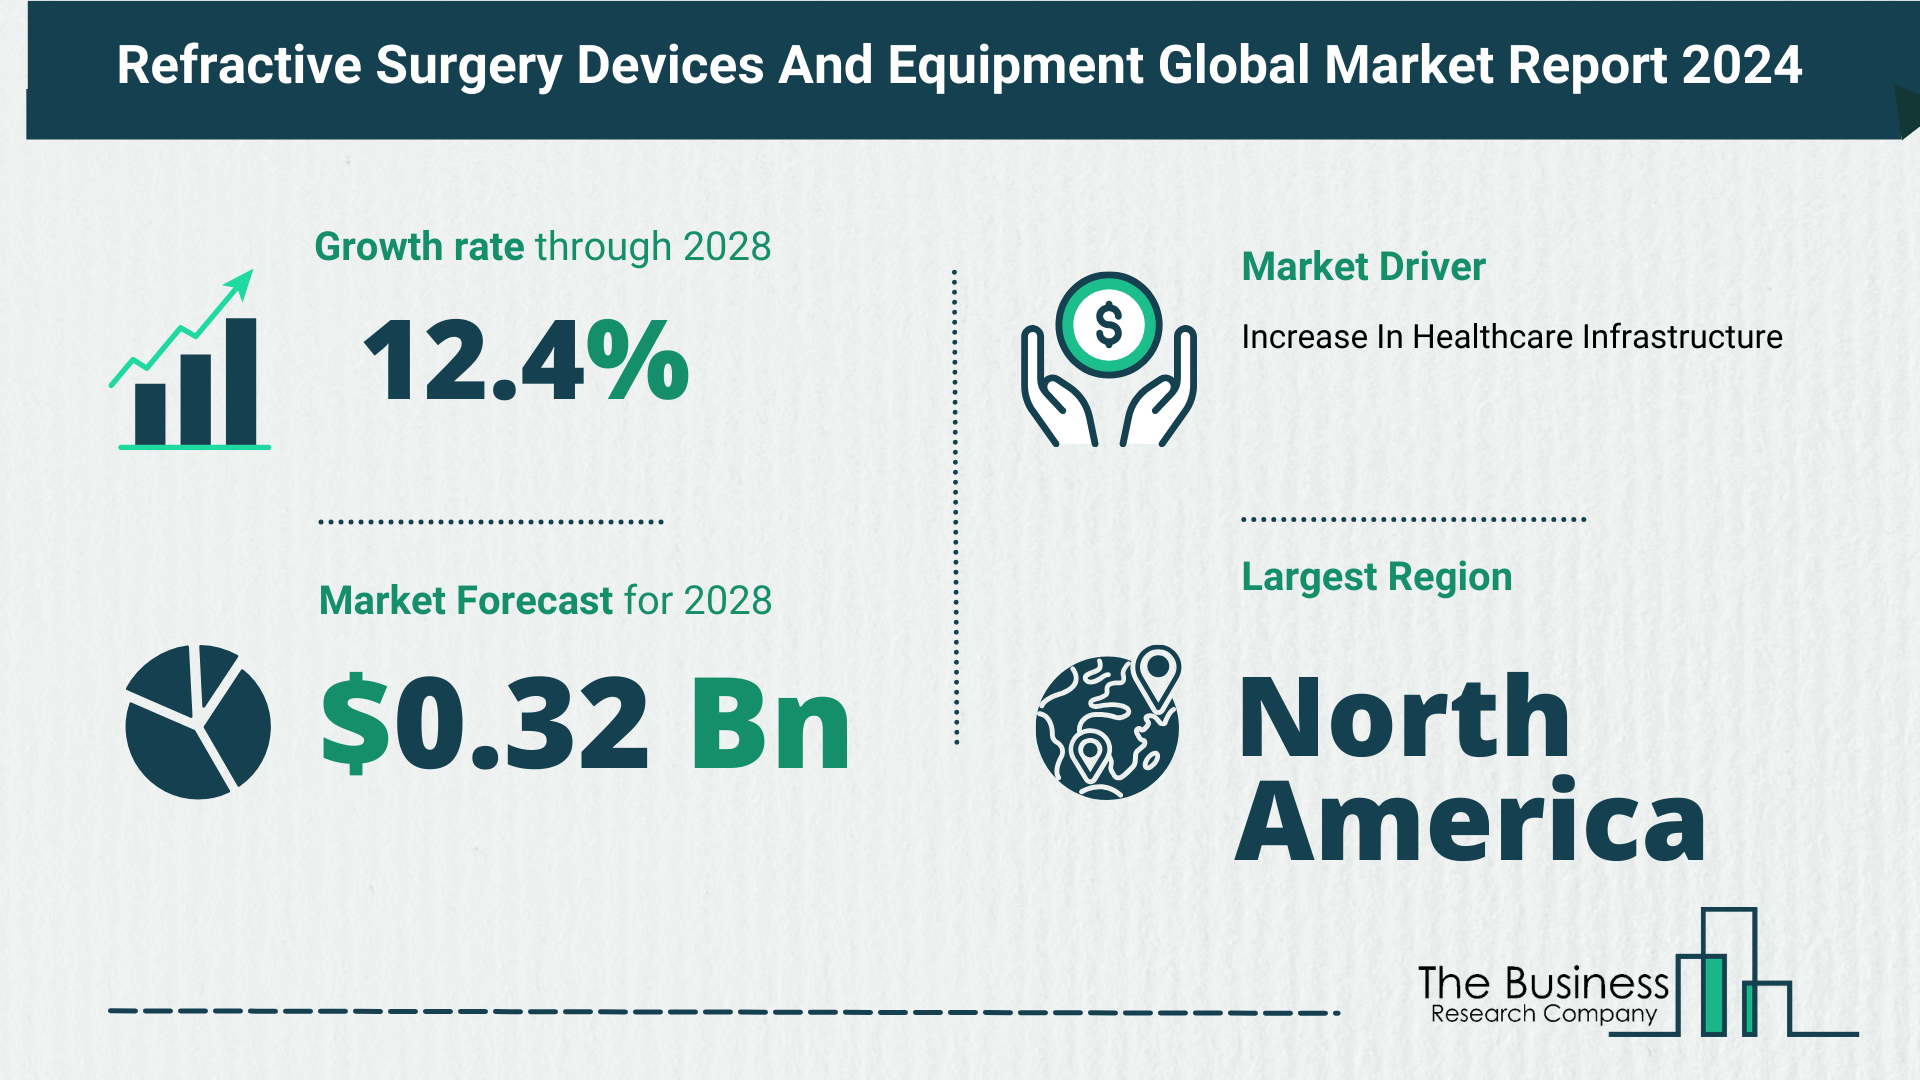 5 Key Insights On The Refractive Surgery Devices And Equipment Market 2024